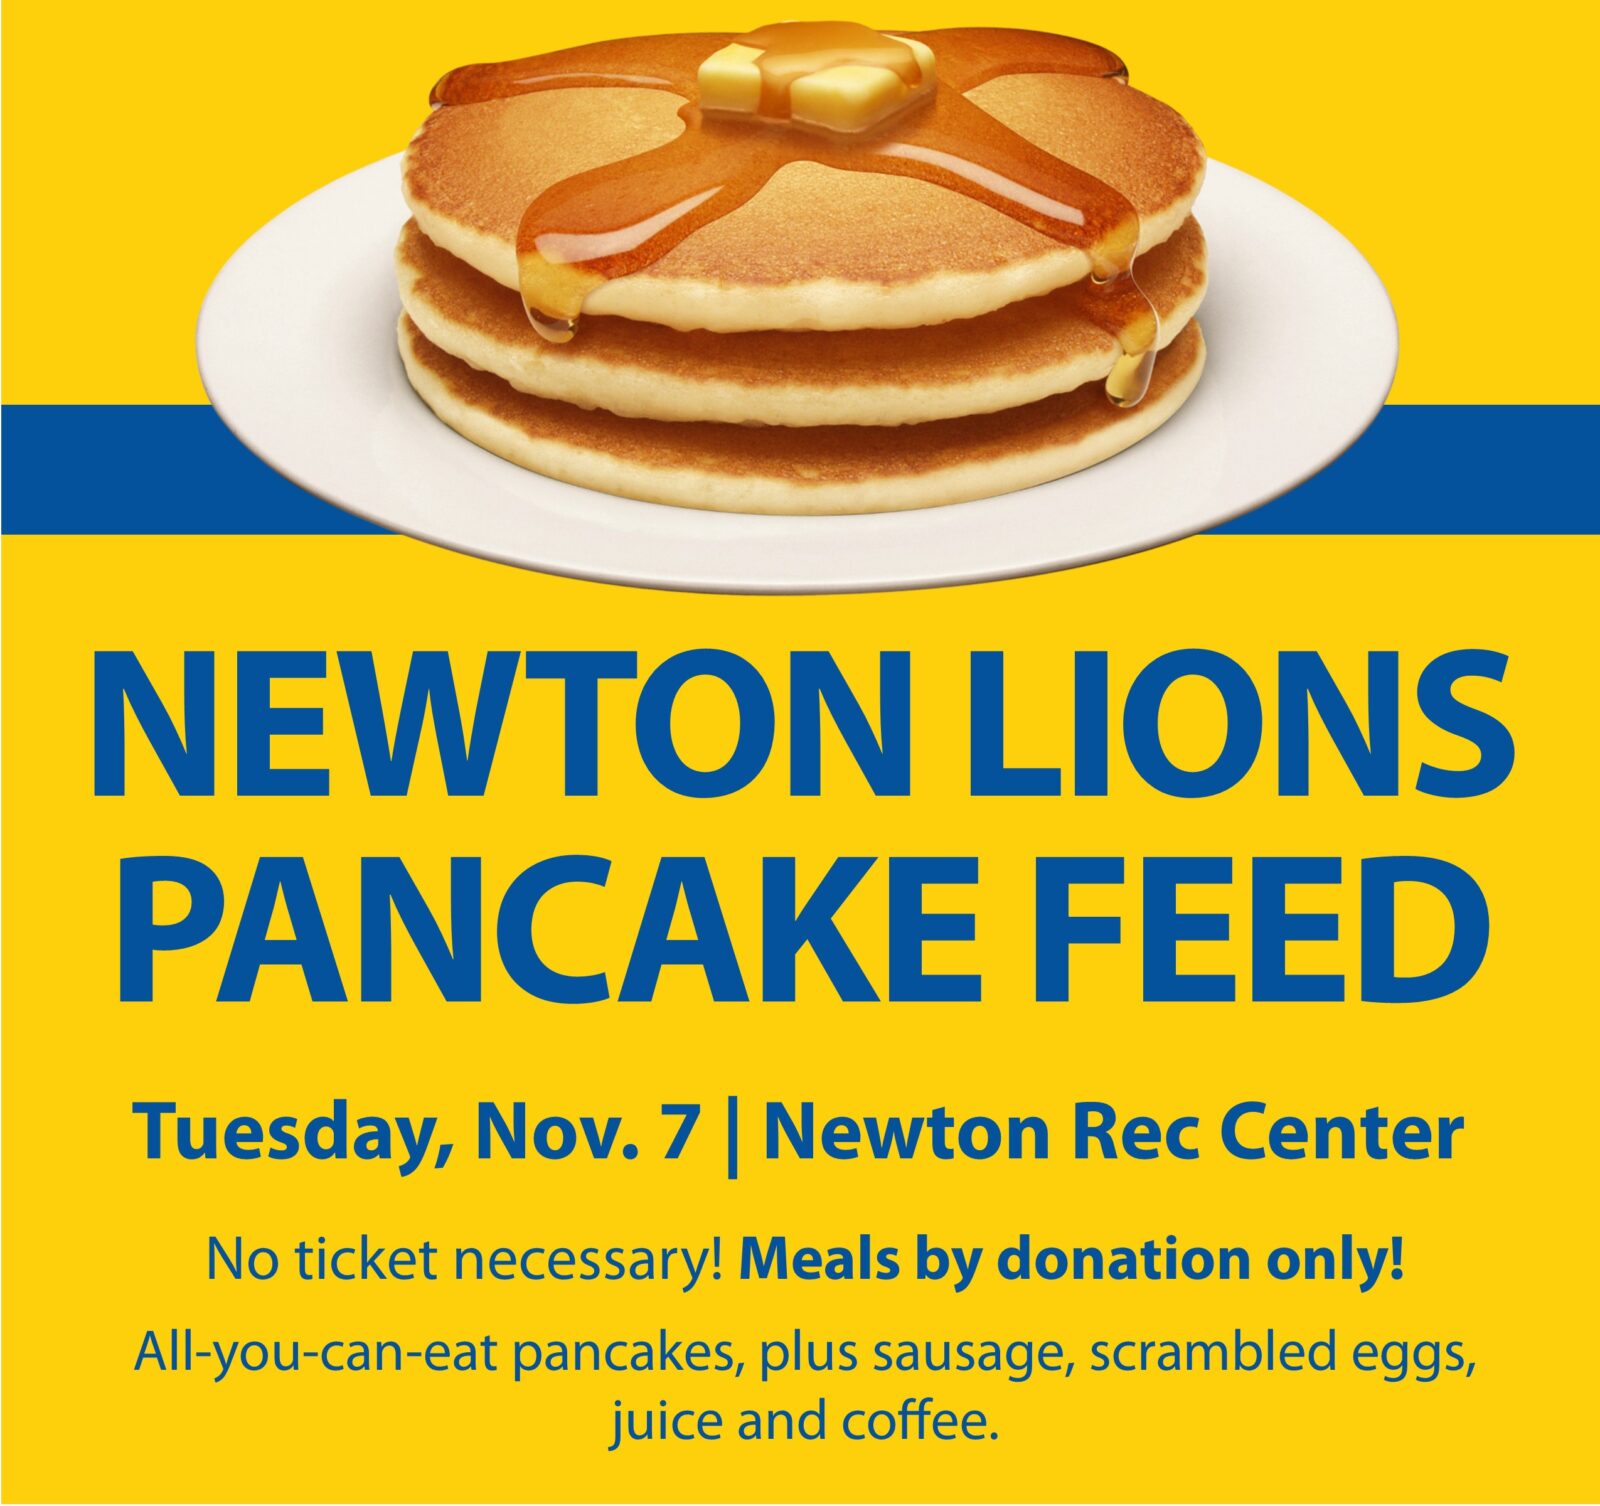 Newton Lions Club Pancake Feed, Tuesday, Nov. 7, Newton Rec Center. No ticket necessary. Meals by donation only! All-you-can-eat pancakes, plus sausage, scrambled eggs, juice and coffee.